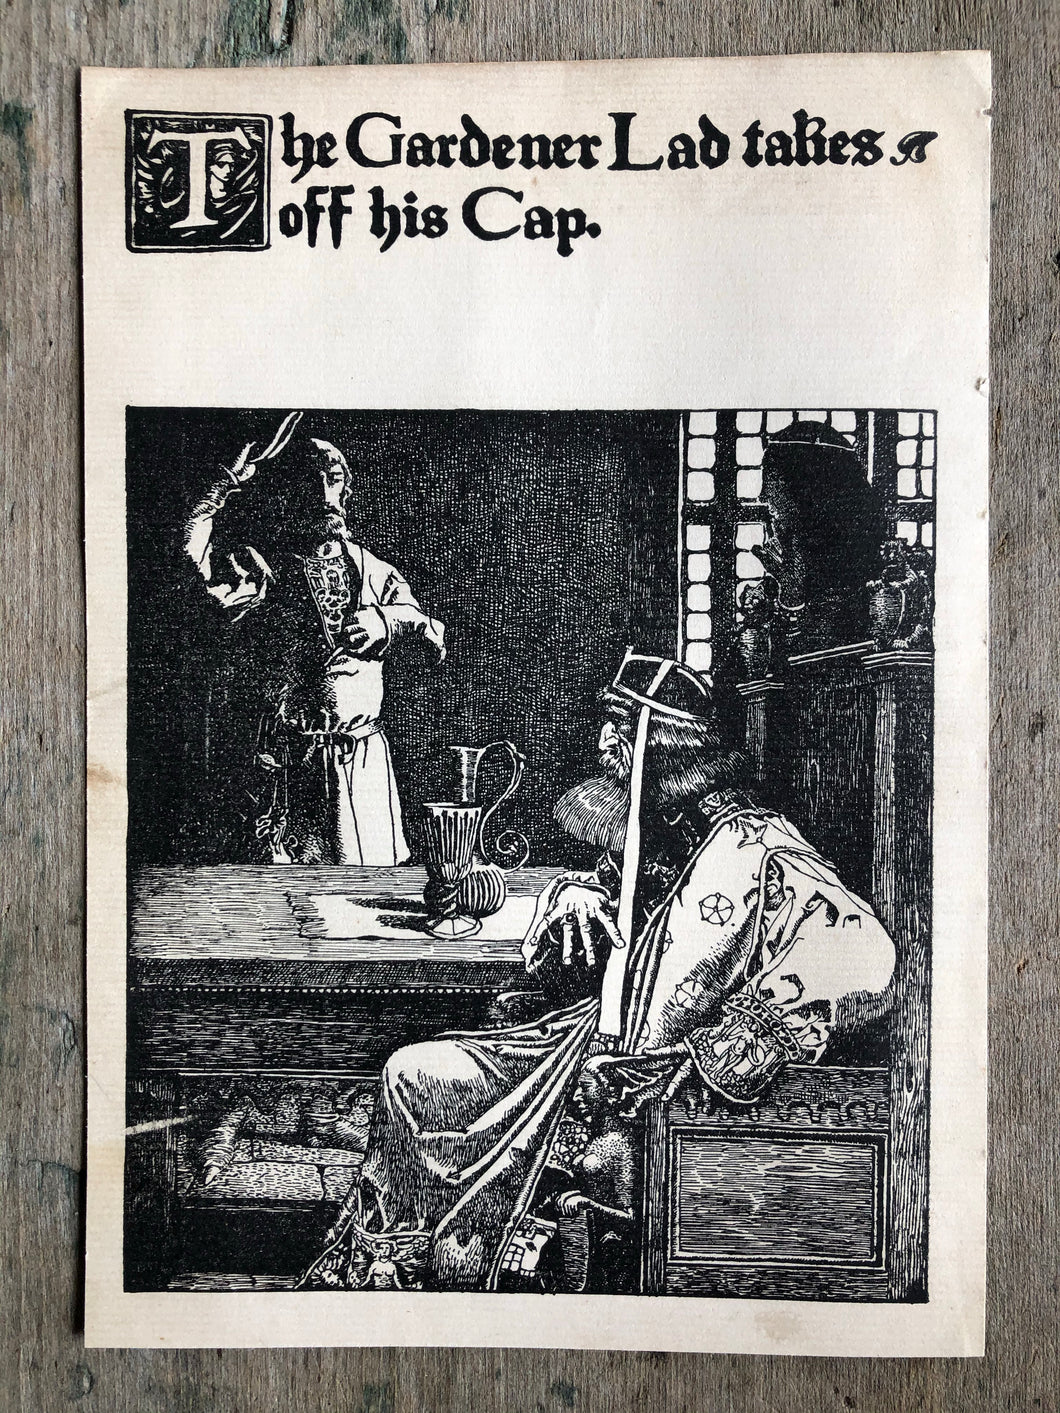 Print from “The Story of King Arthur and His Knights” by Howard Pyle